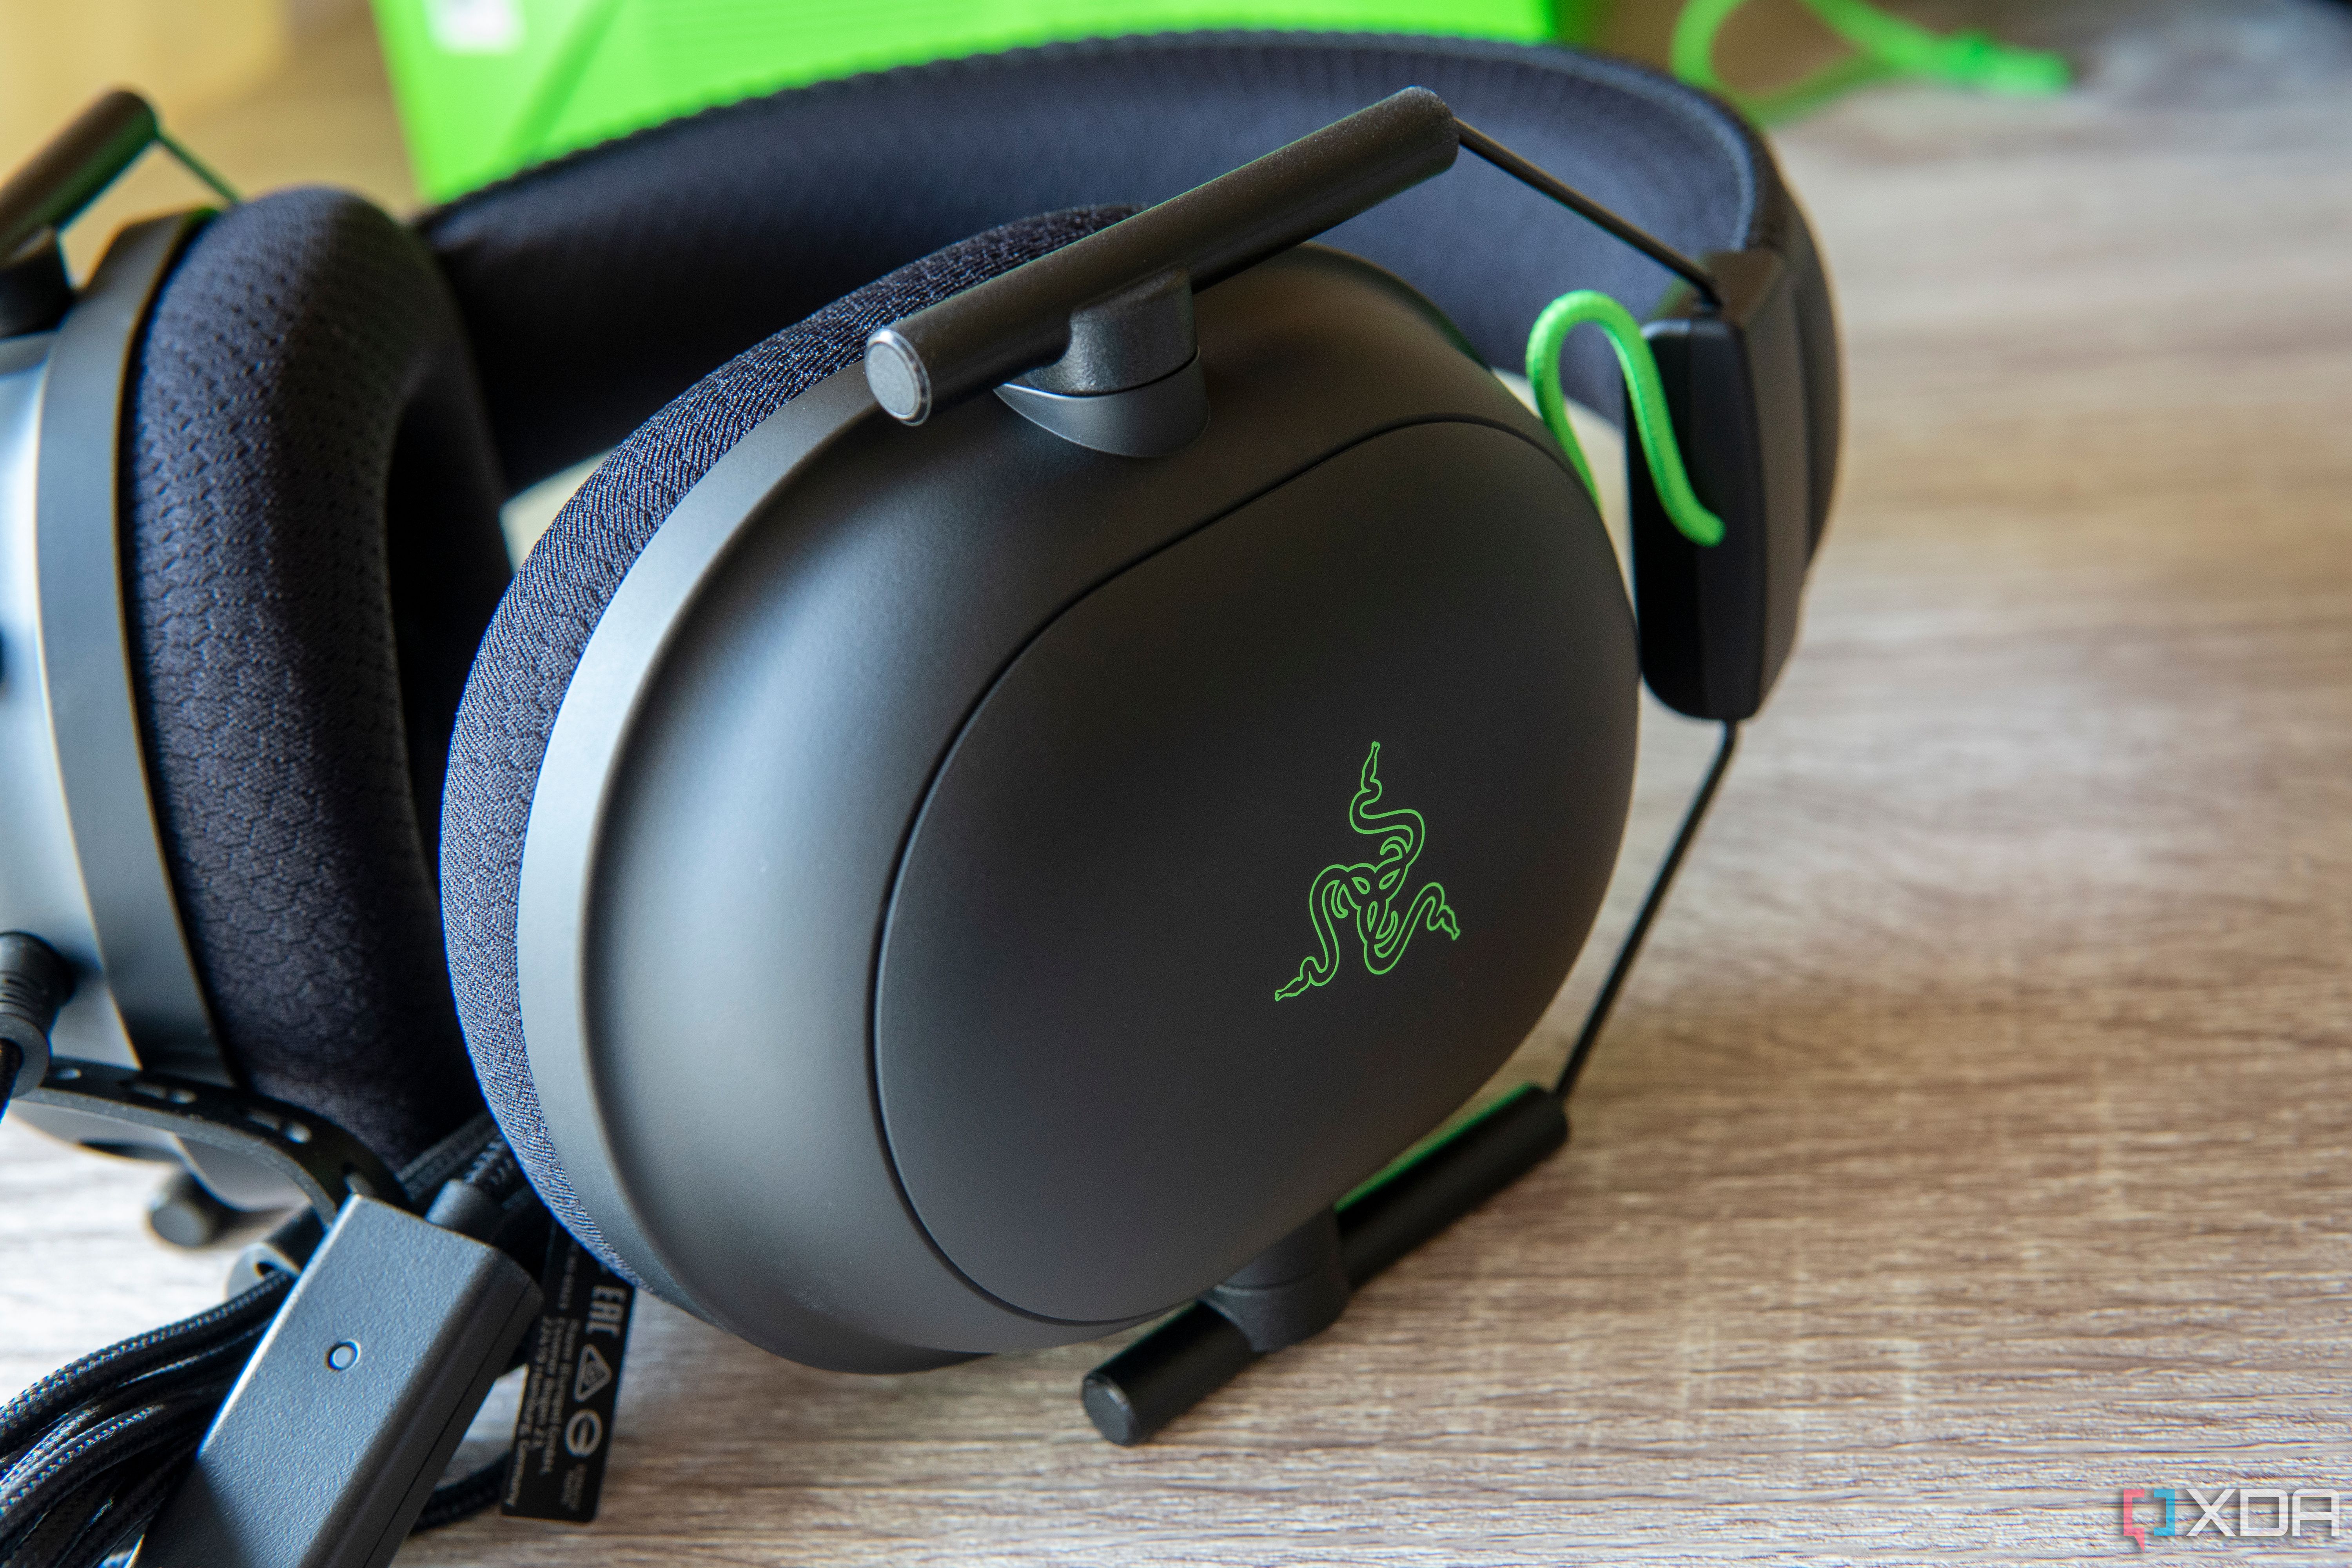 Close-up view of the outside of the earcup on the Razer BlackShark V2 headset